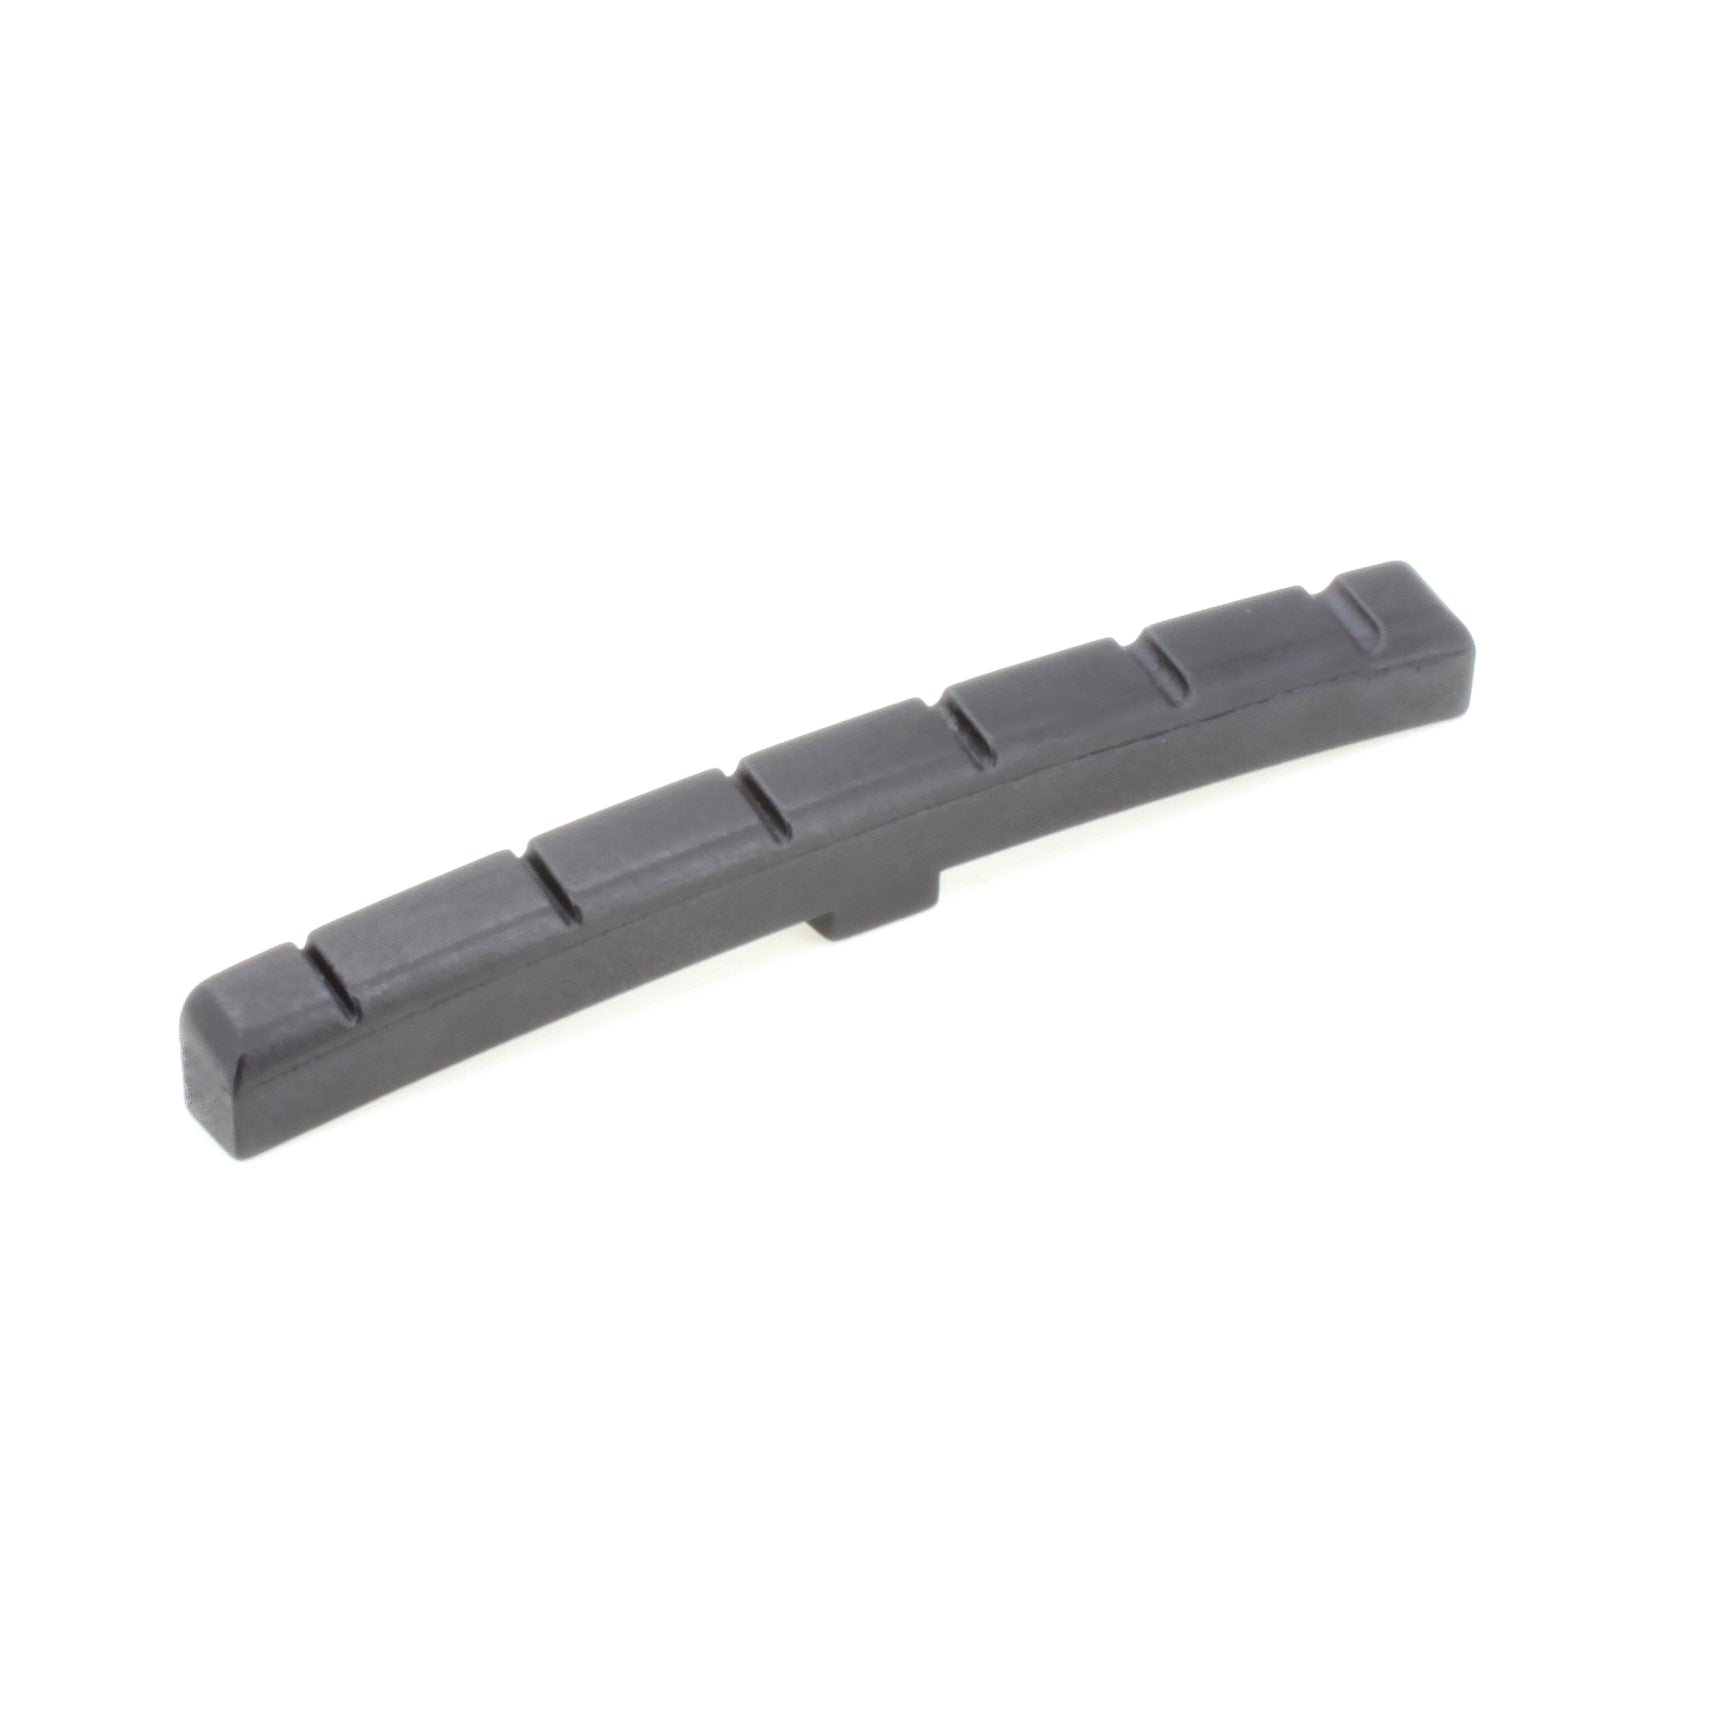 Model 5072-00 Nut Slotted Flat or Curved Bottom R7.25 L43.18mm (Select  Material)